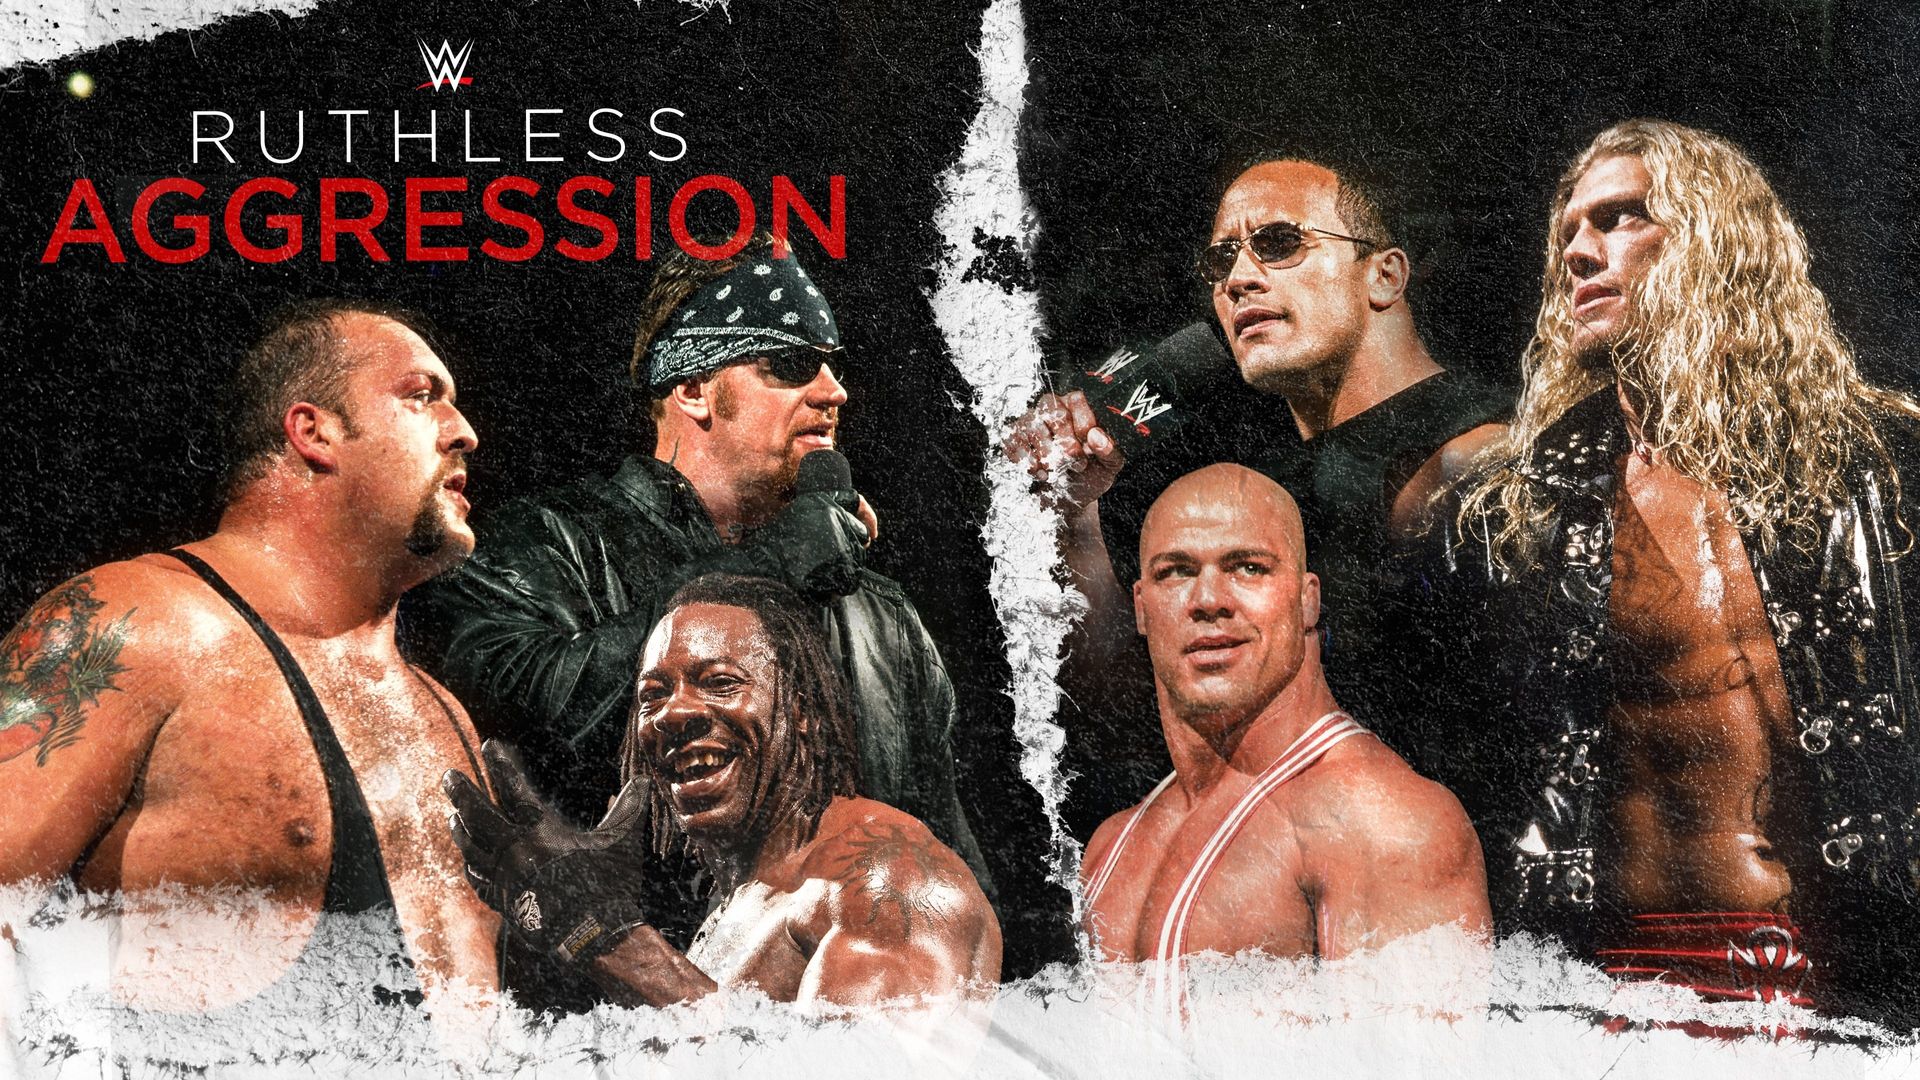 WWE Ruthless Aggression background